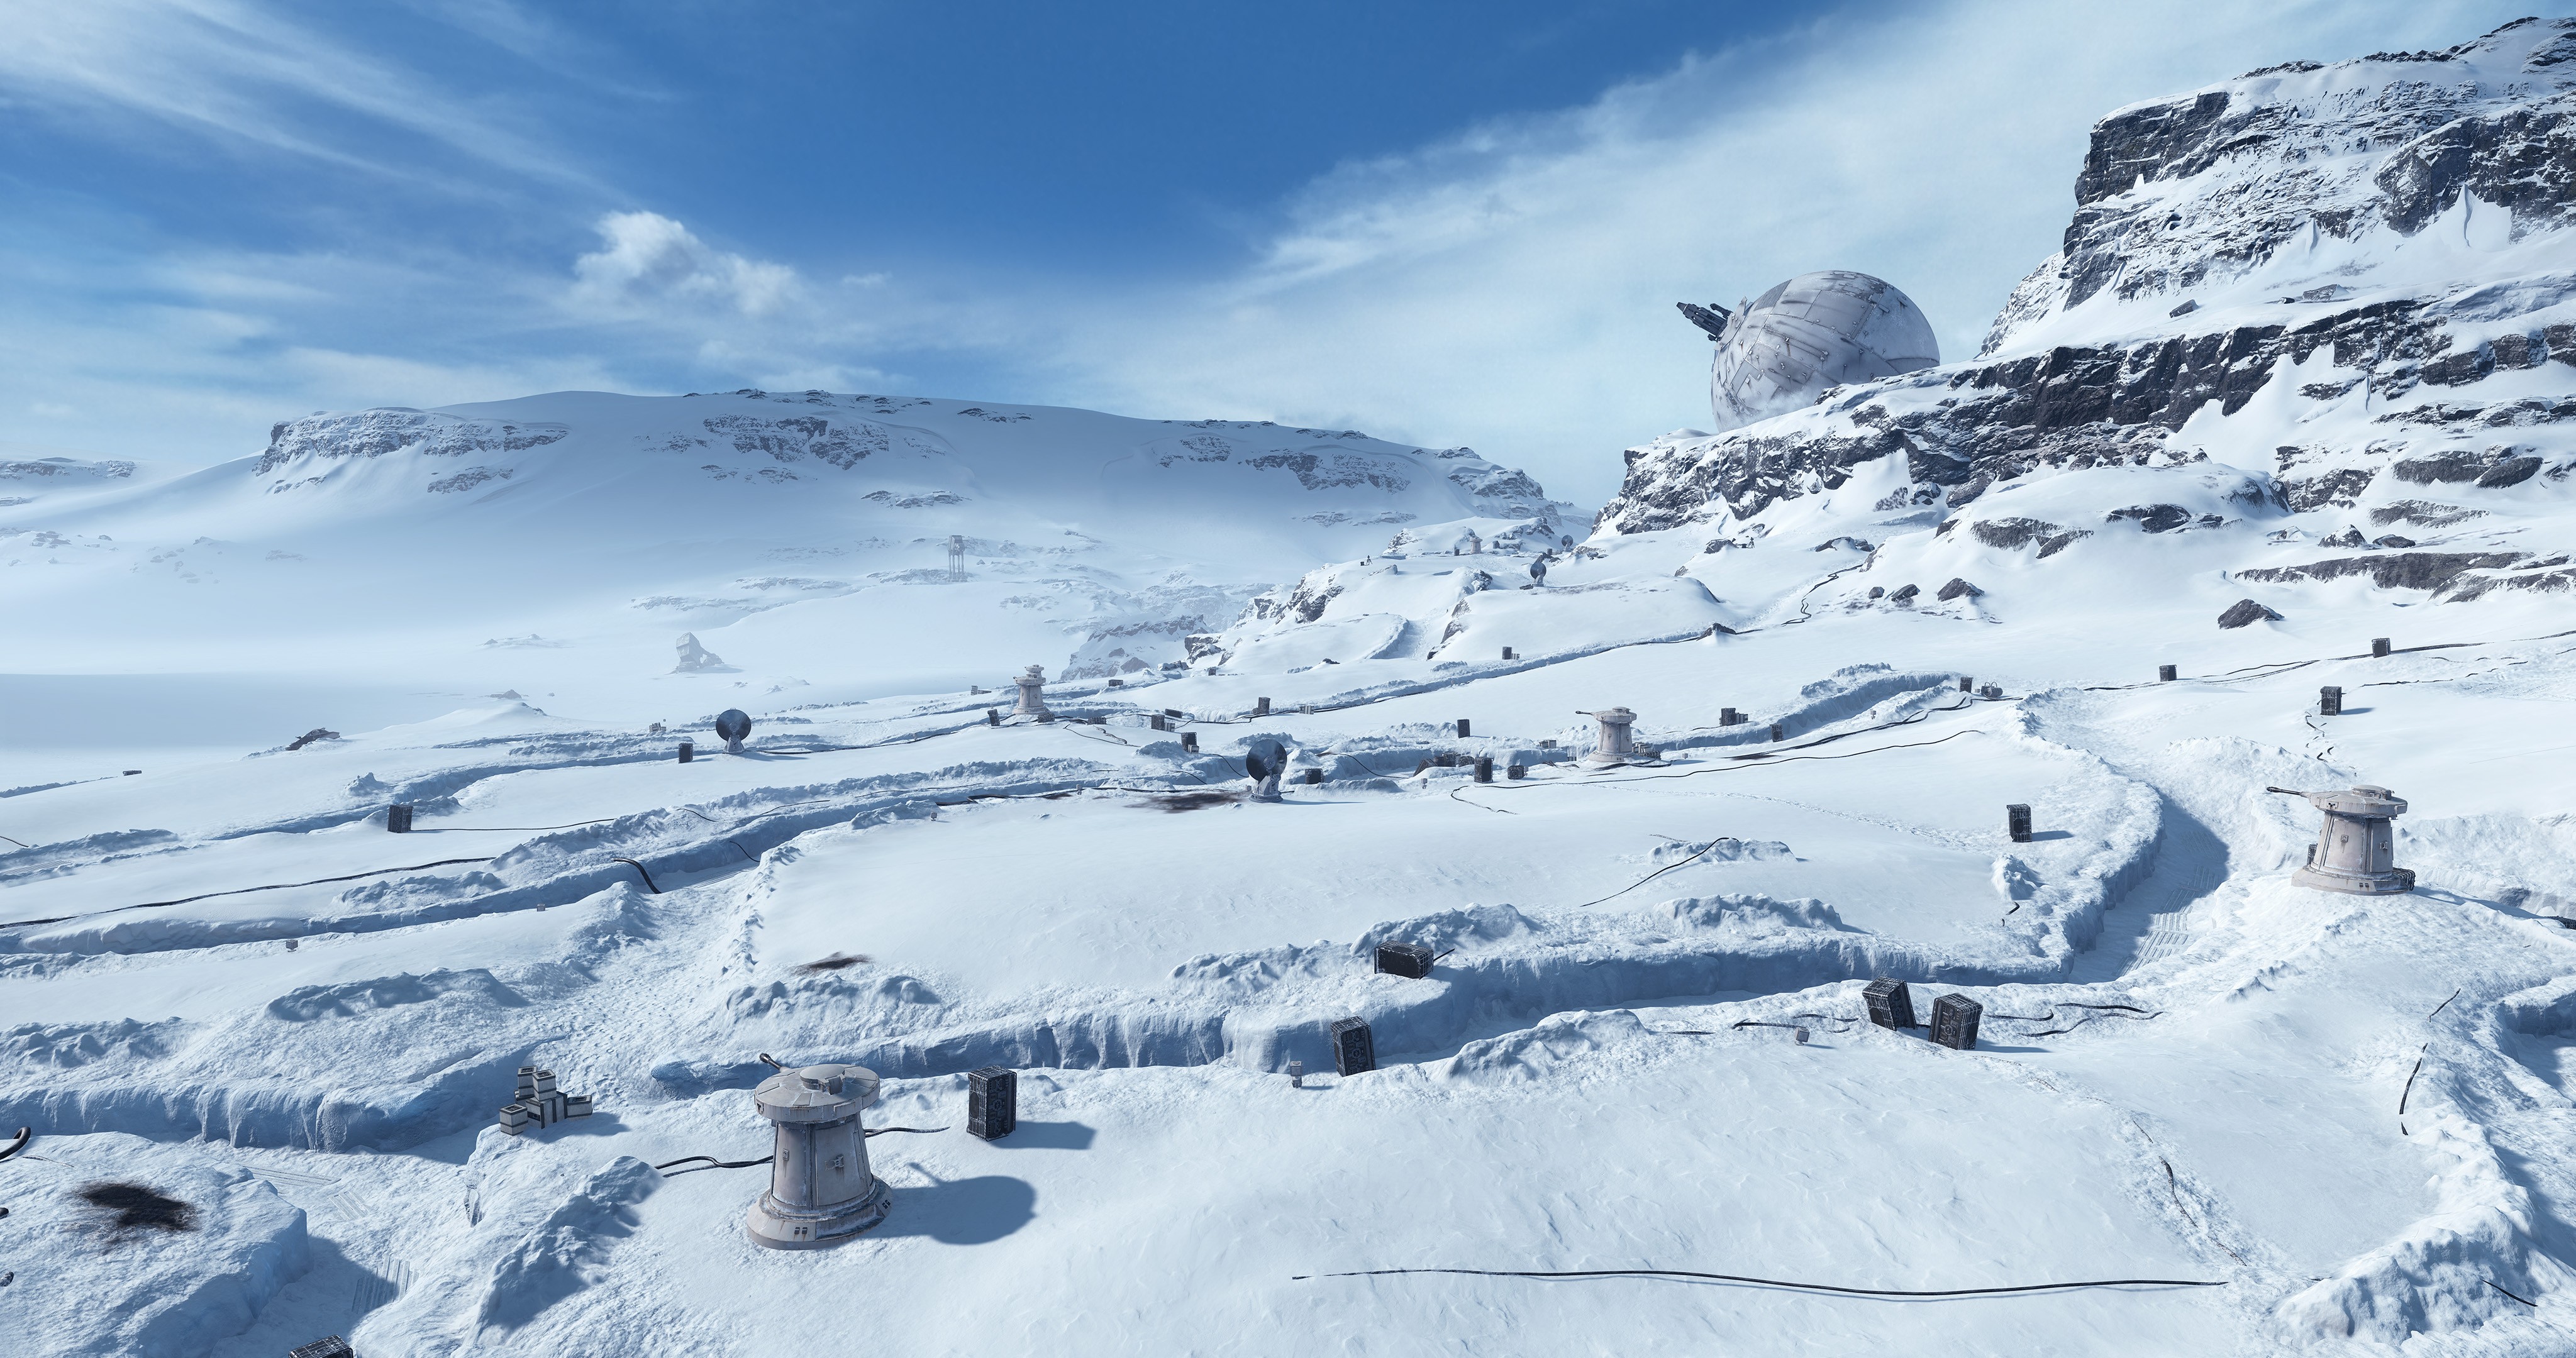 Star Wars, Hoth, Snow Wallpapers HD / Desktop and Mobile Backgrounds